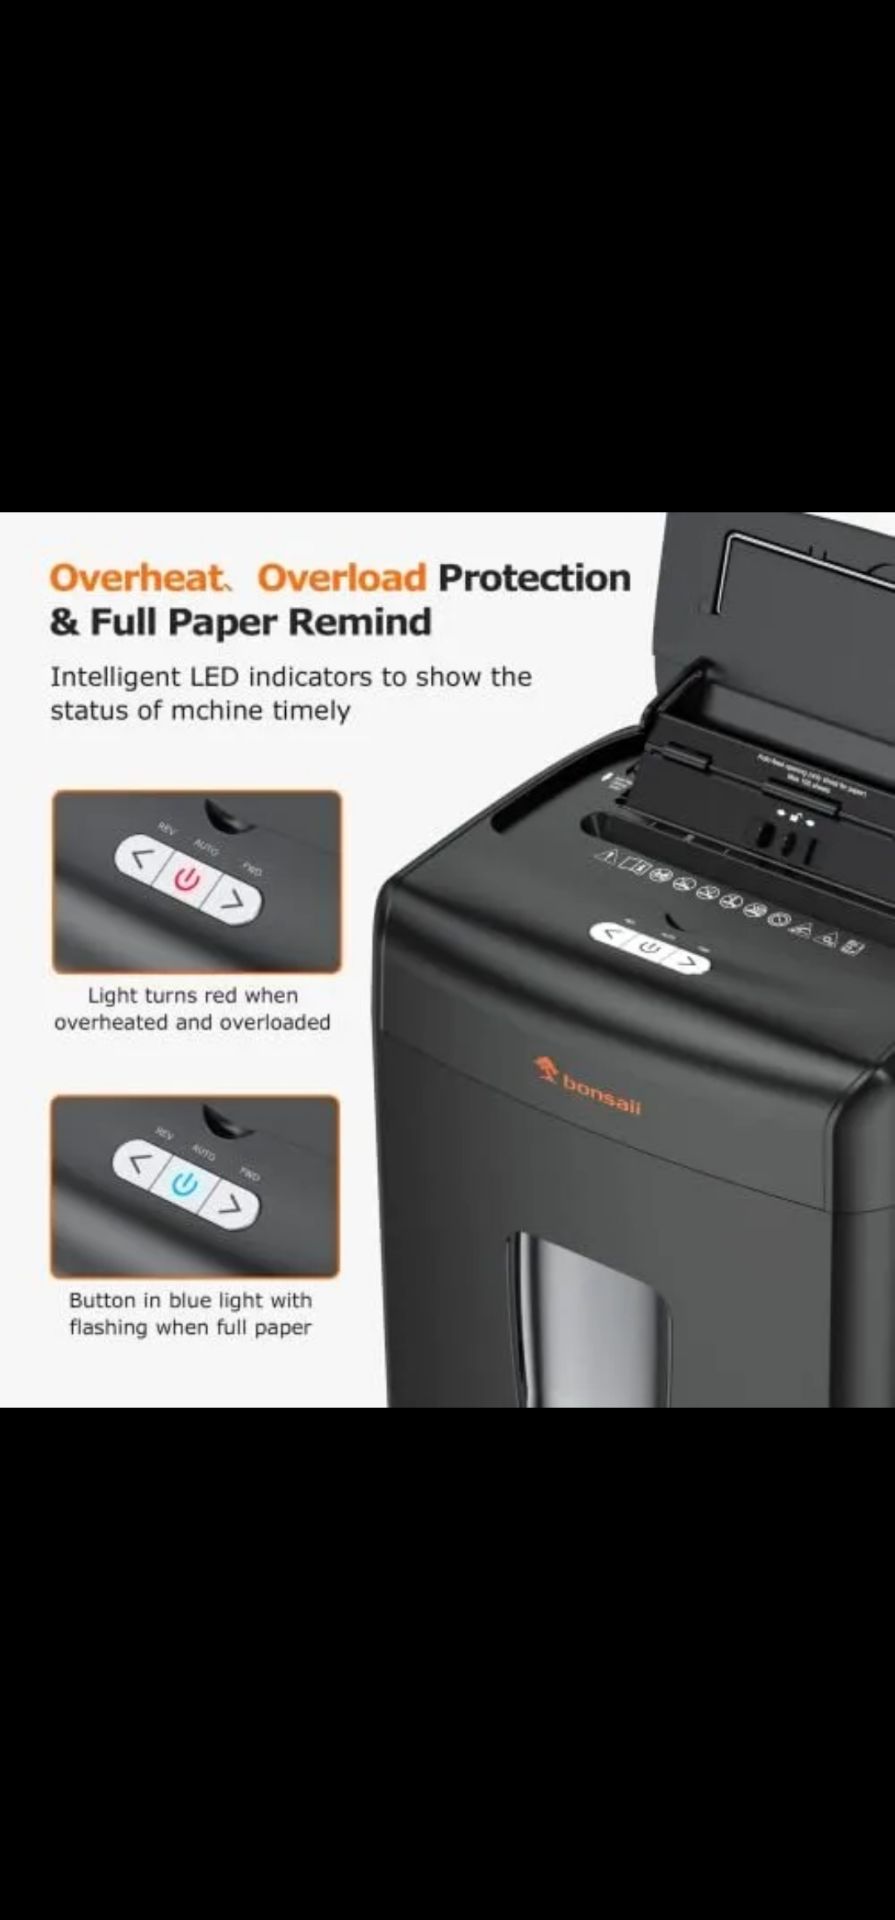 RRP £179.99 - BONSAII HEAVY DUTY PAPER SHREDDER, 110-SHEET, AUTO FEED FOR OFFICE OR HOME - NO VAT - Image 5 of 5